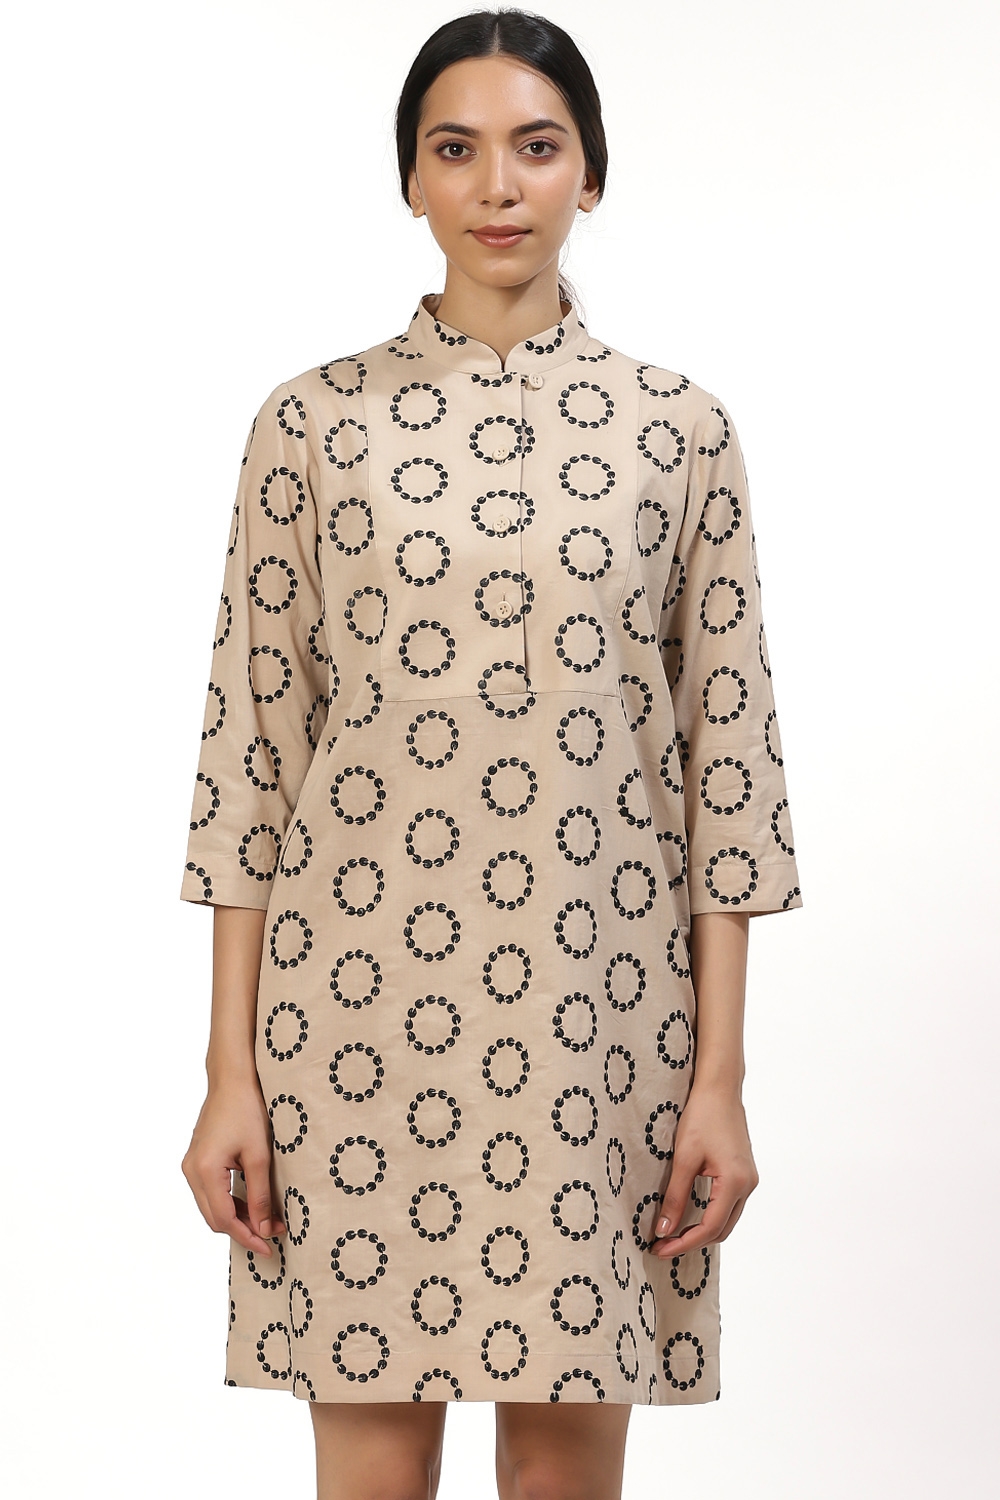 ABRAHAM AND THAKORE | Beige And Black Rings Dress